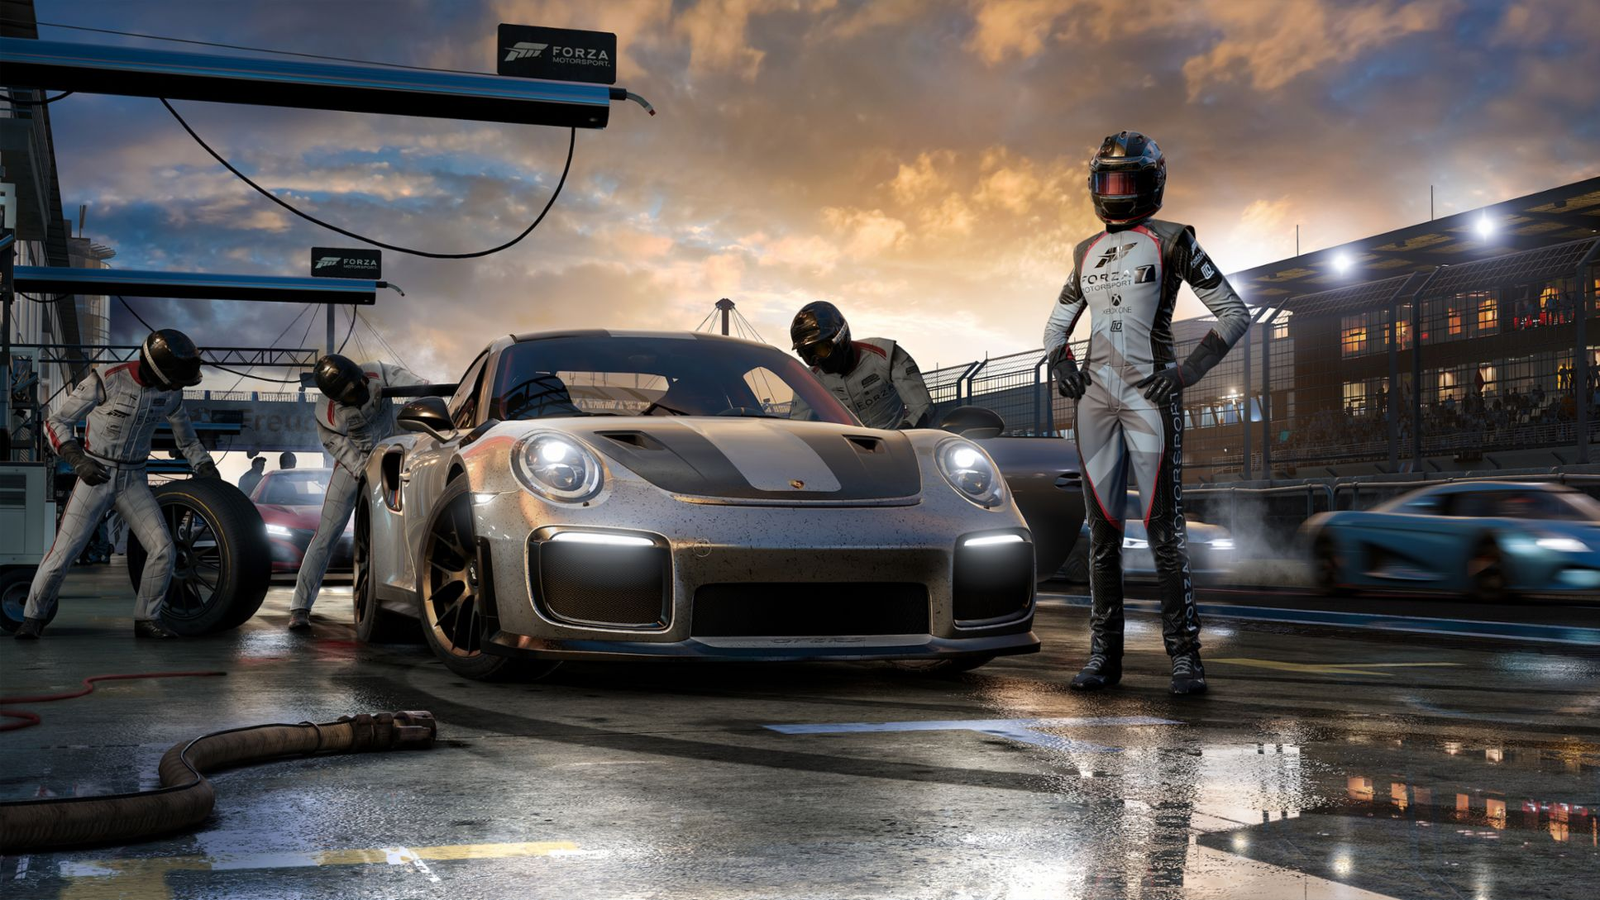 Forza Motorsport doesn't play on Steam Deck right now